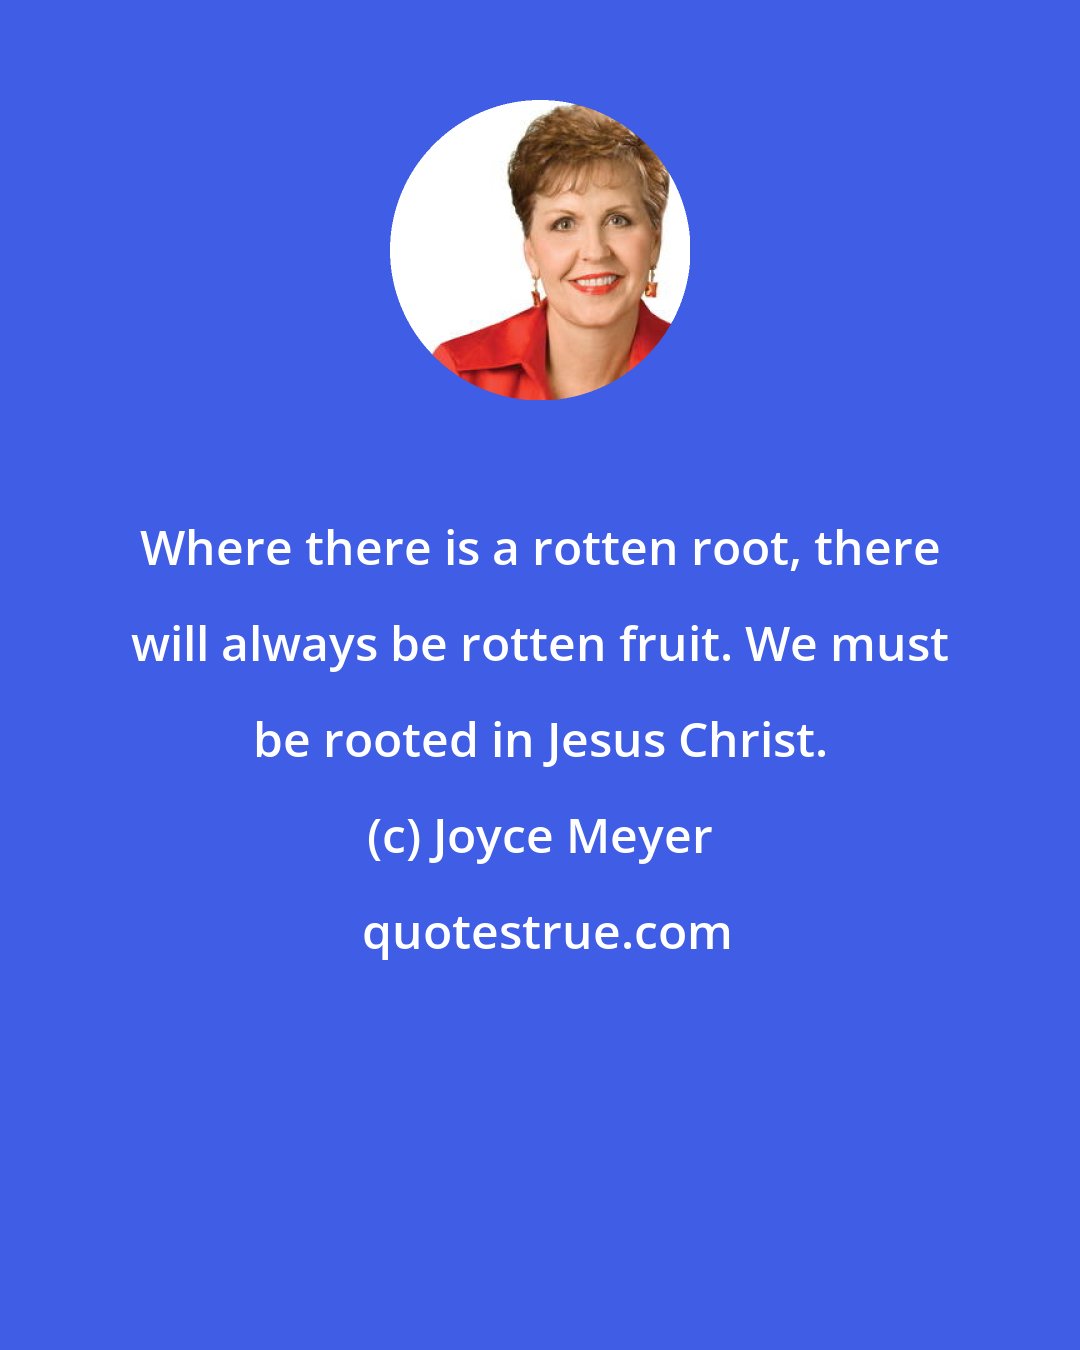 Joyce Meyer: Where there is a rotten root, there will always be rotten fruit. We must be rooted in Jesus Christ.